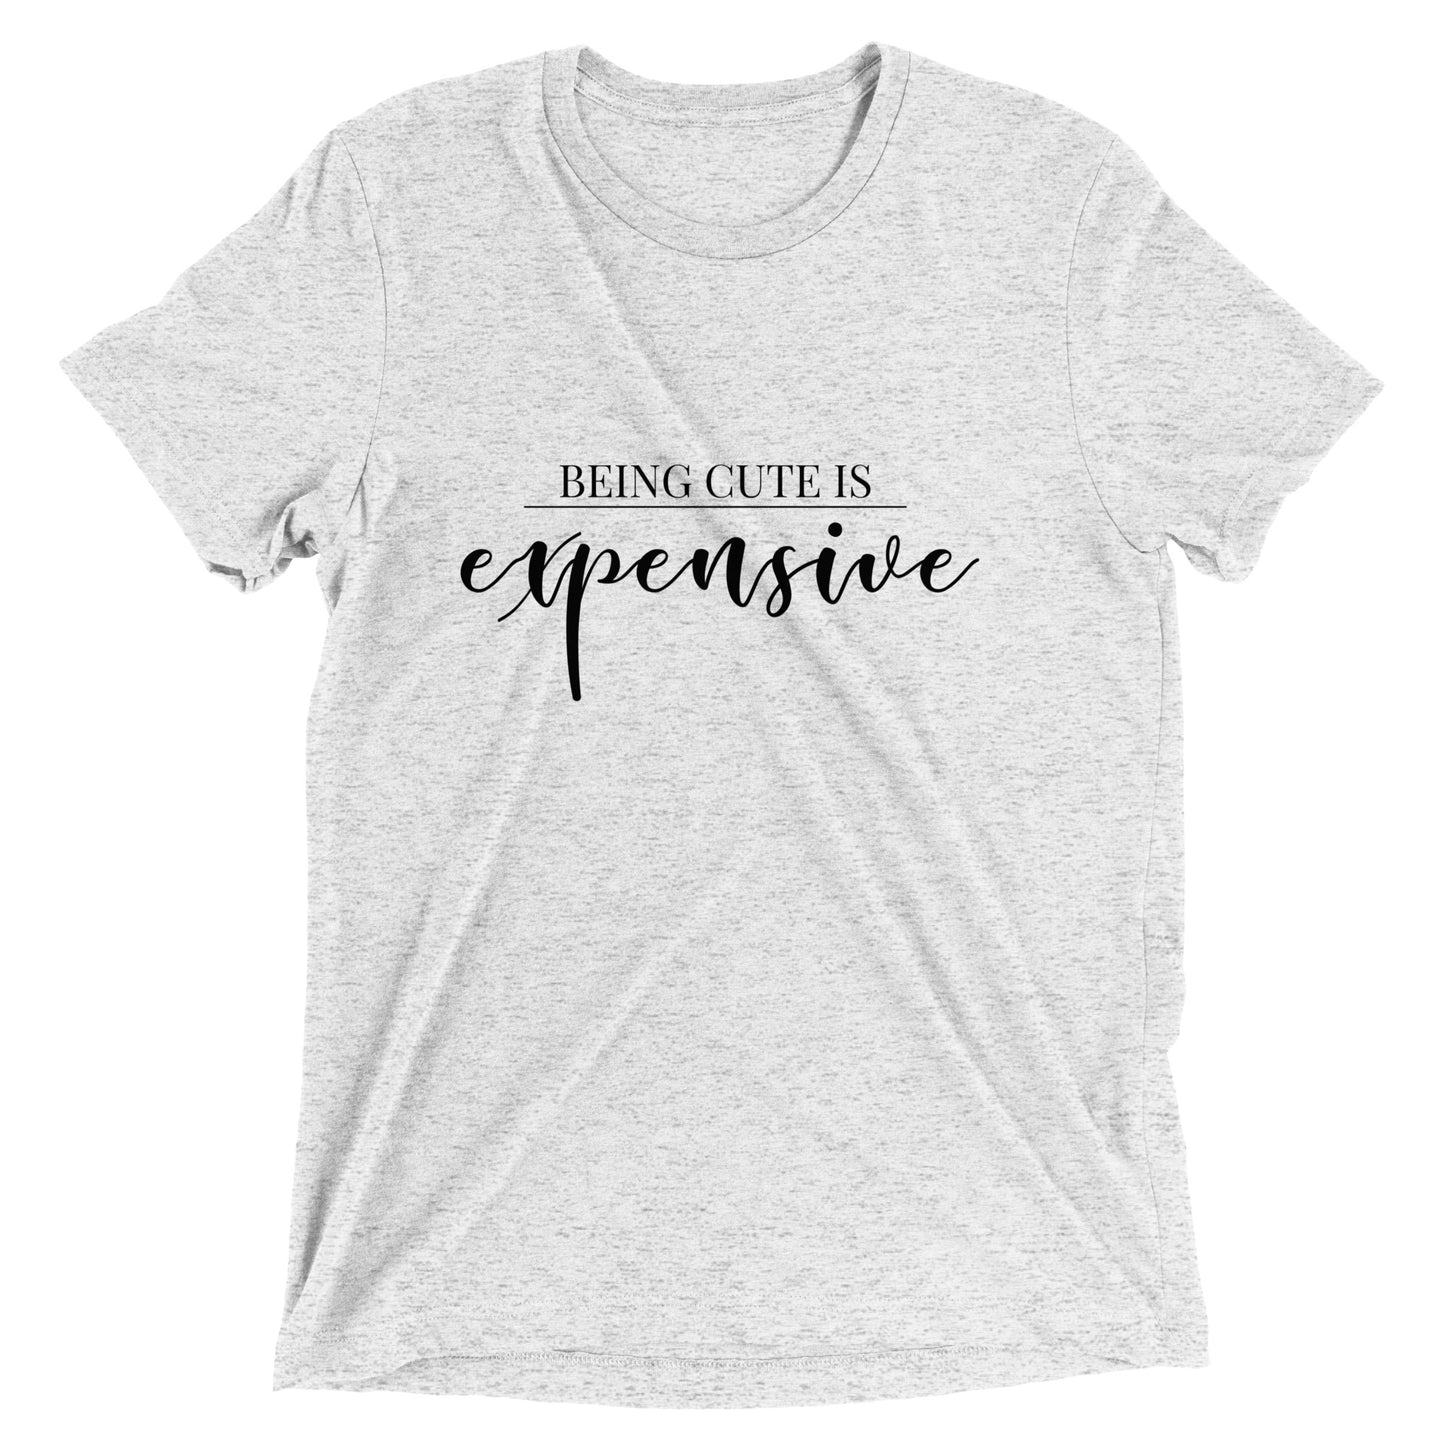 Iconic "Being cute is expensive" Short sleeve t-shirt